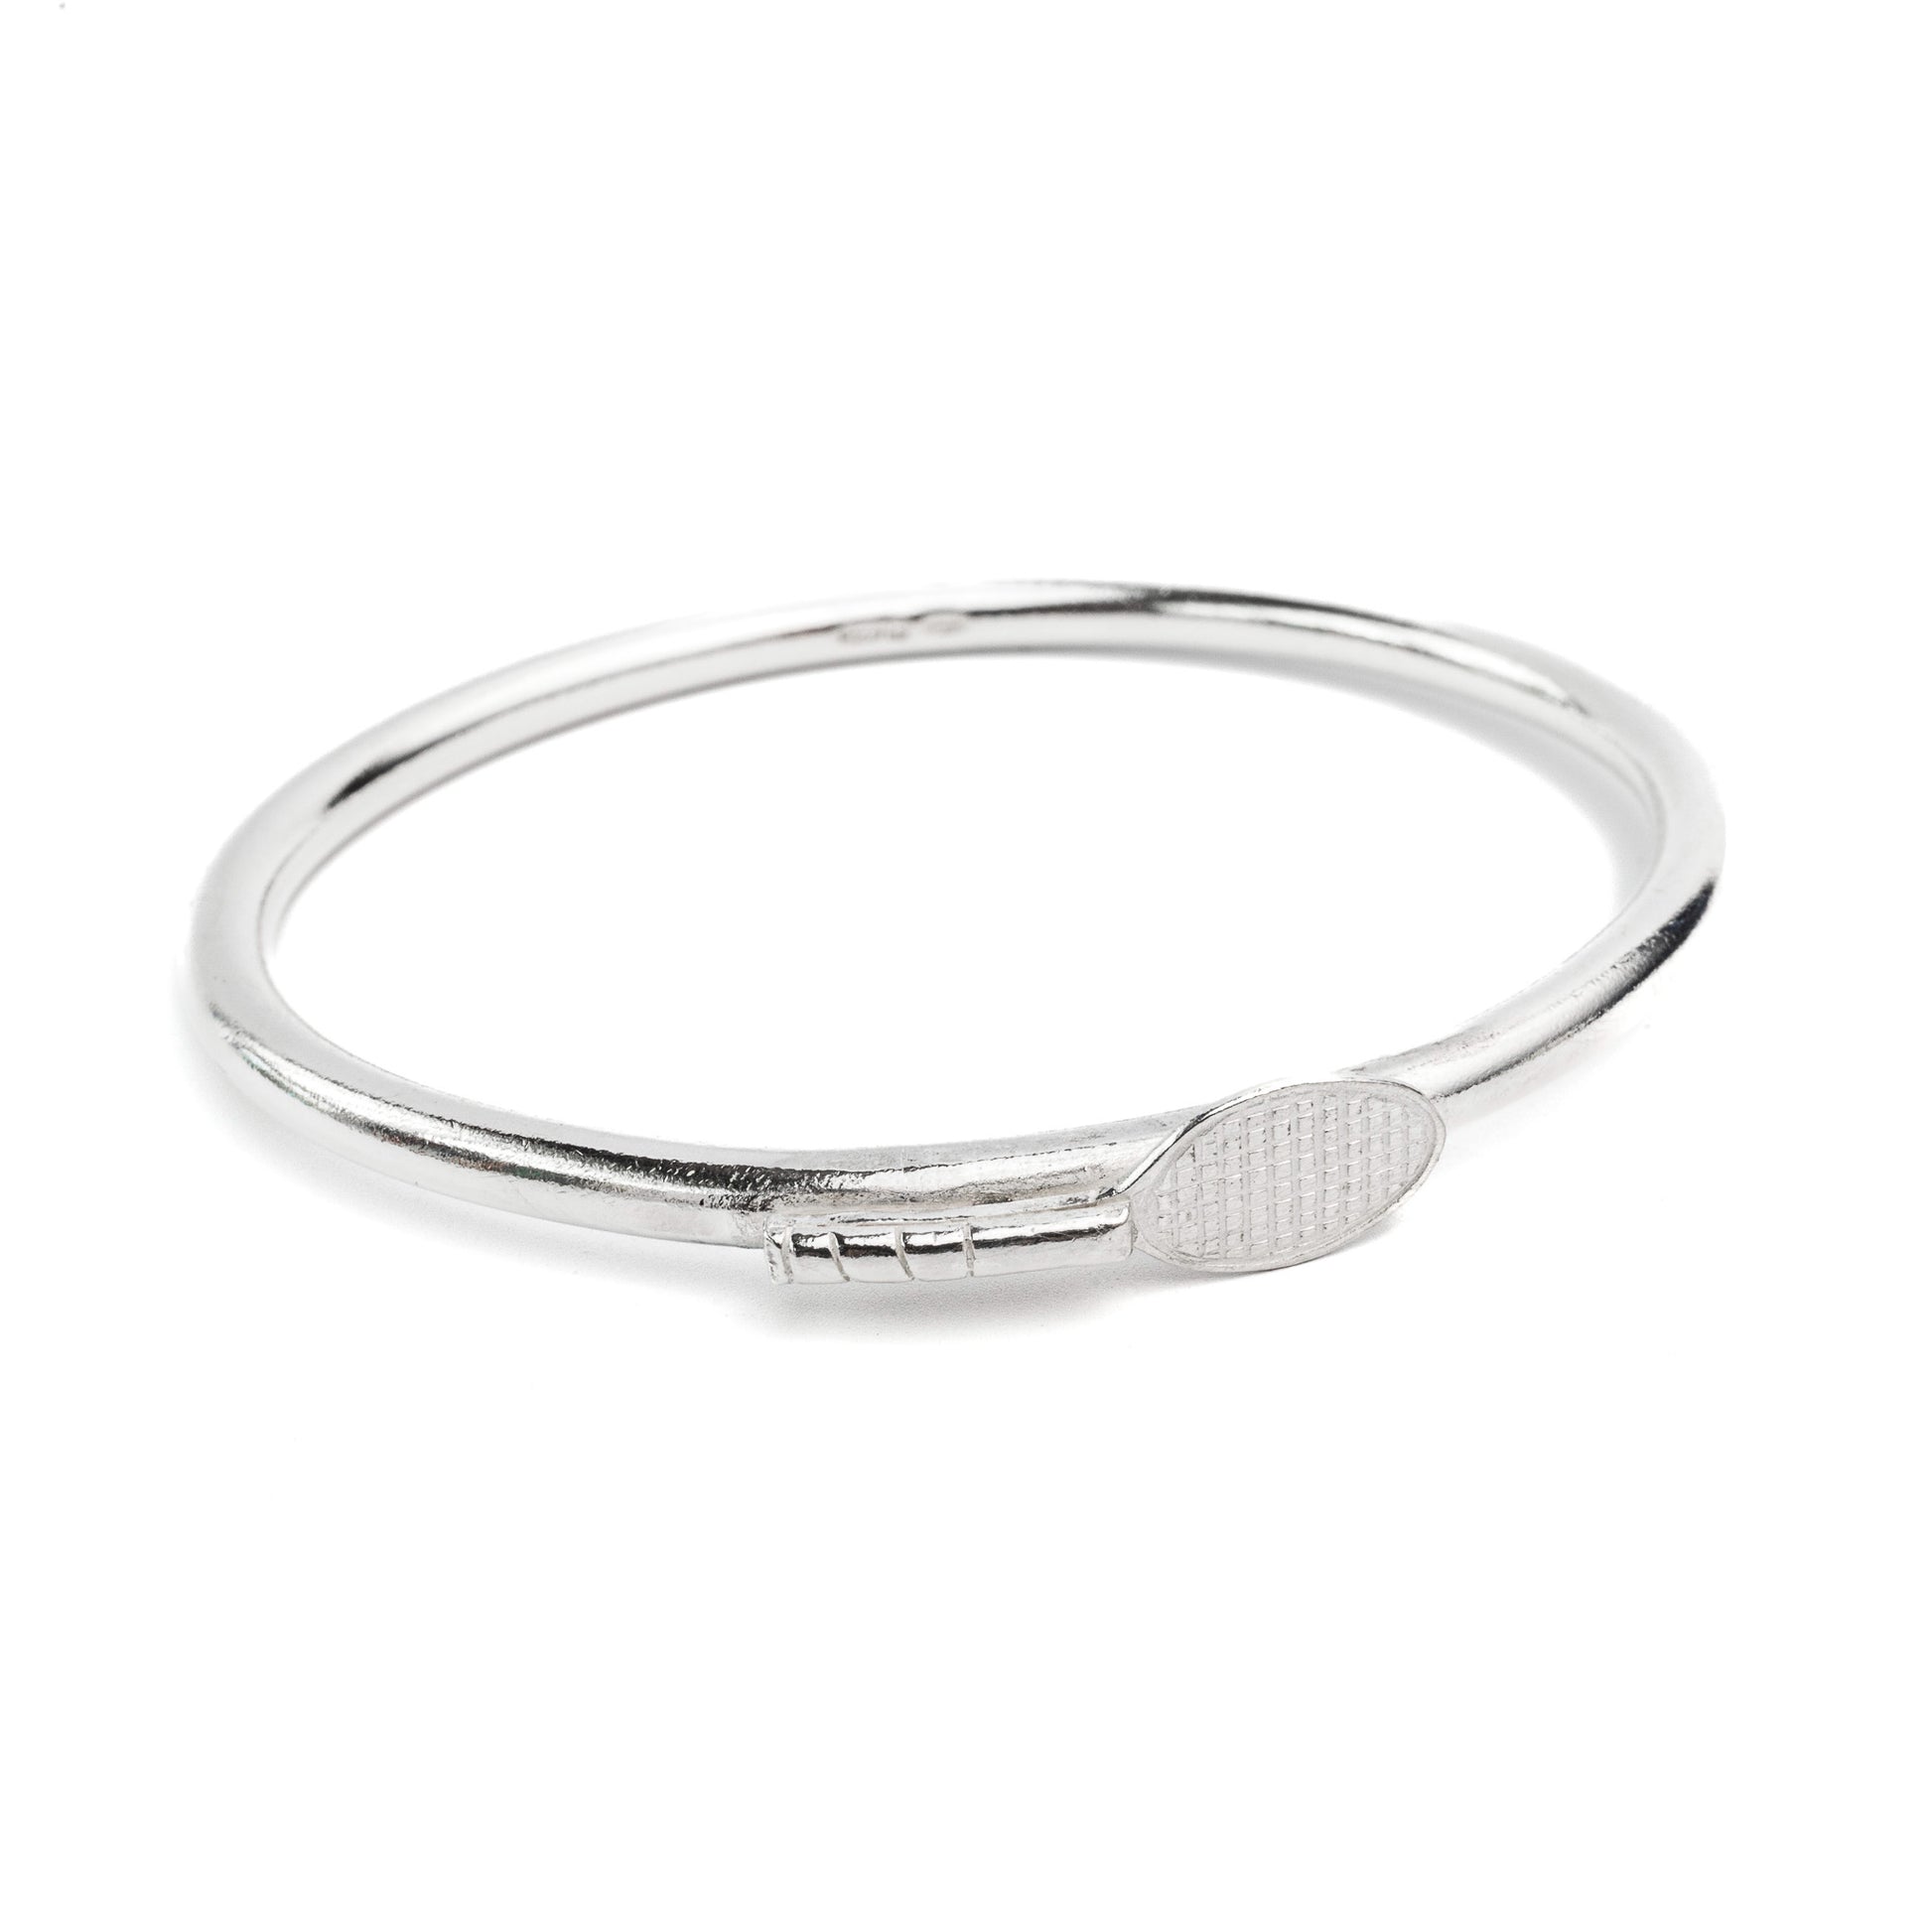 Sterling silver solid bangle with tennis racket handmade